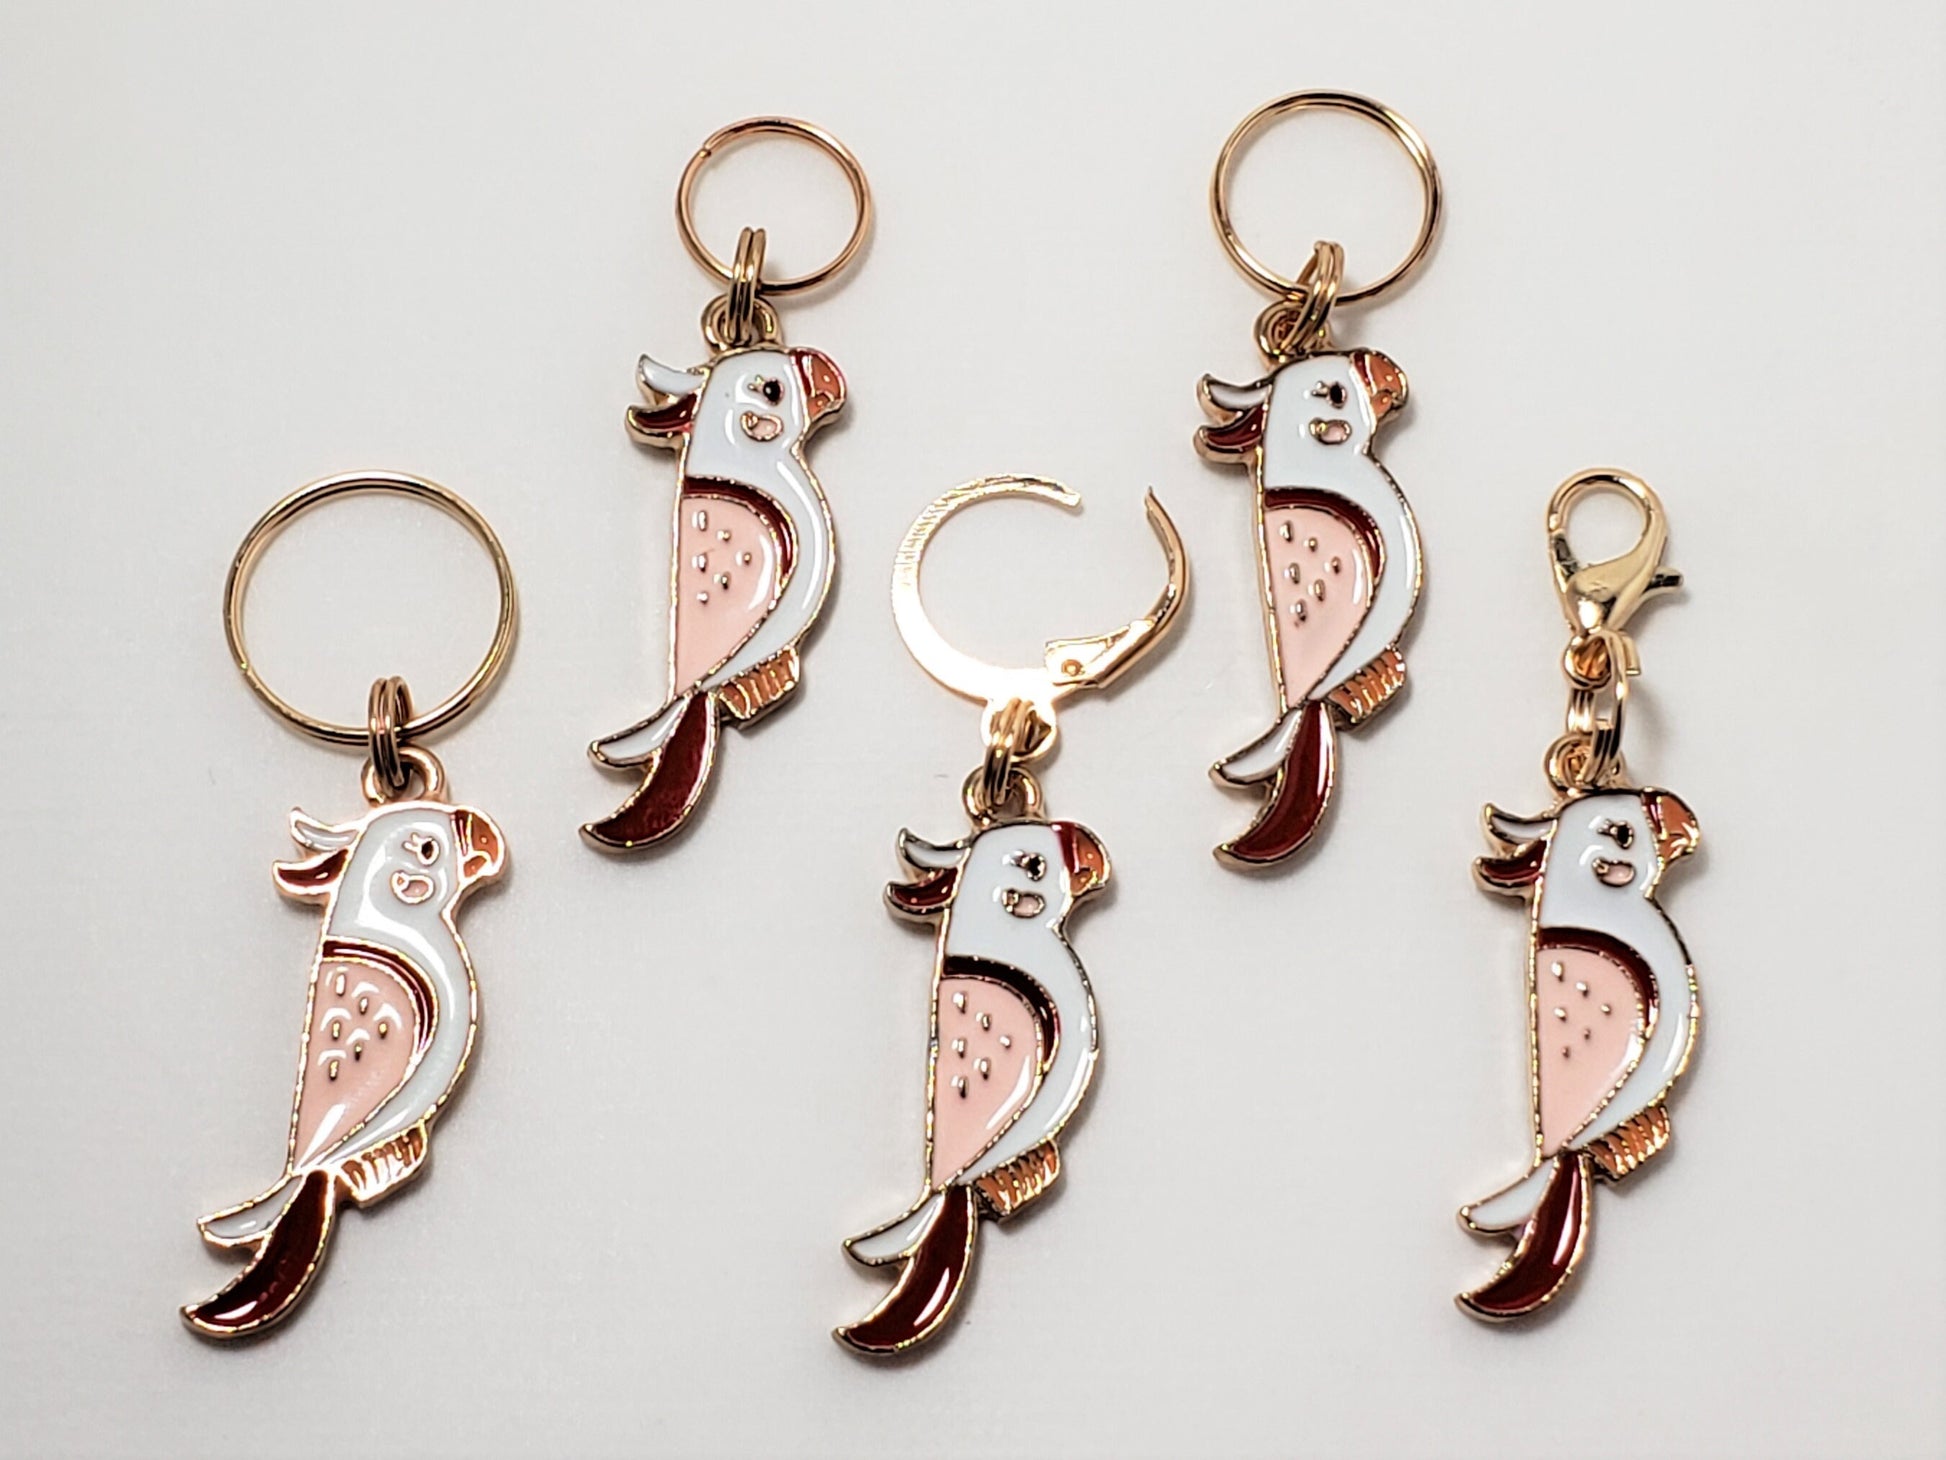 Stitch Markers for Knitting, 5pc Pink Cockatiel Parrots | Crochet stitch marker, progress keeper, project bag charms, crochet accessories